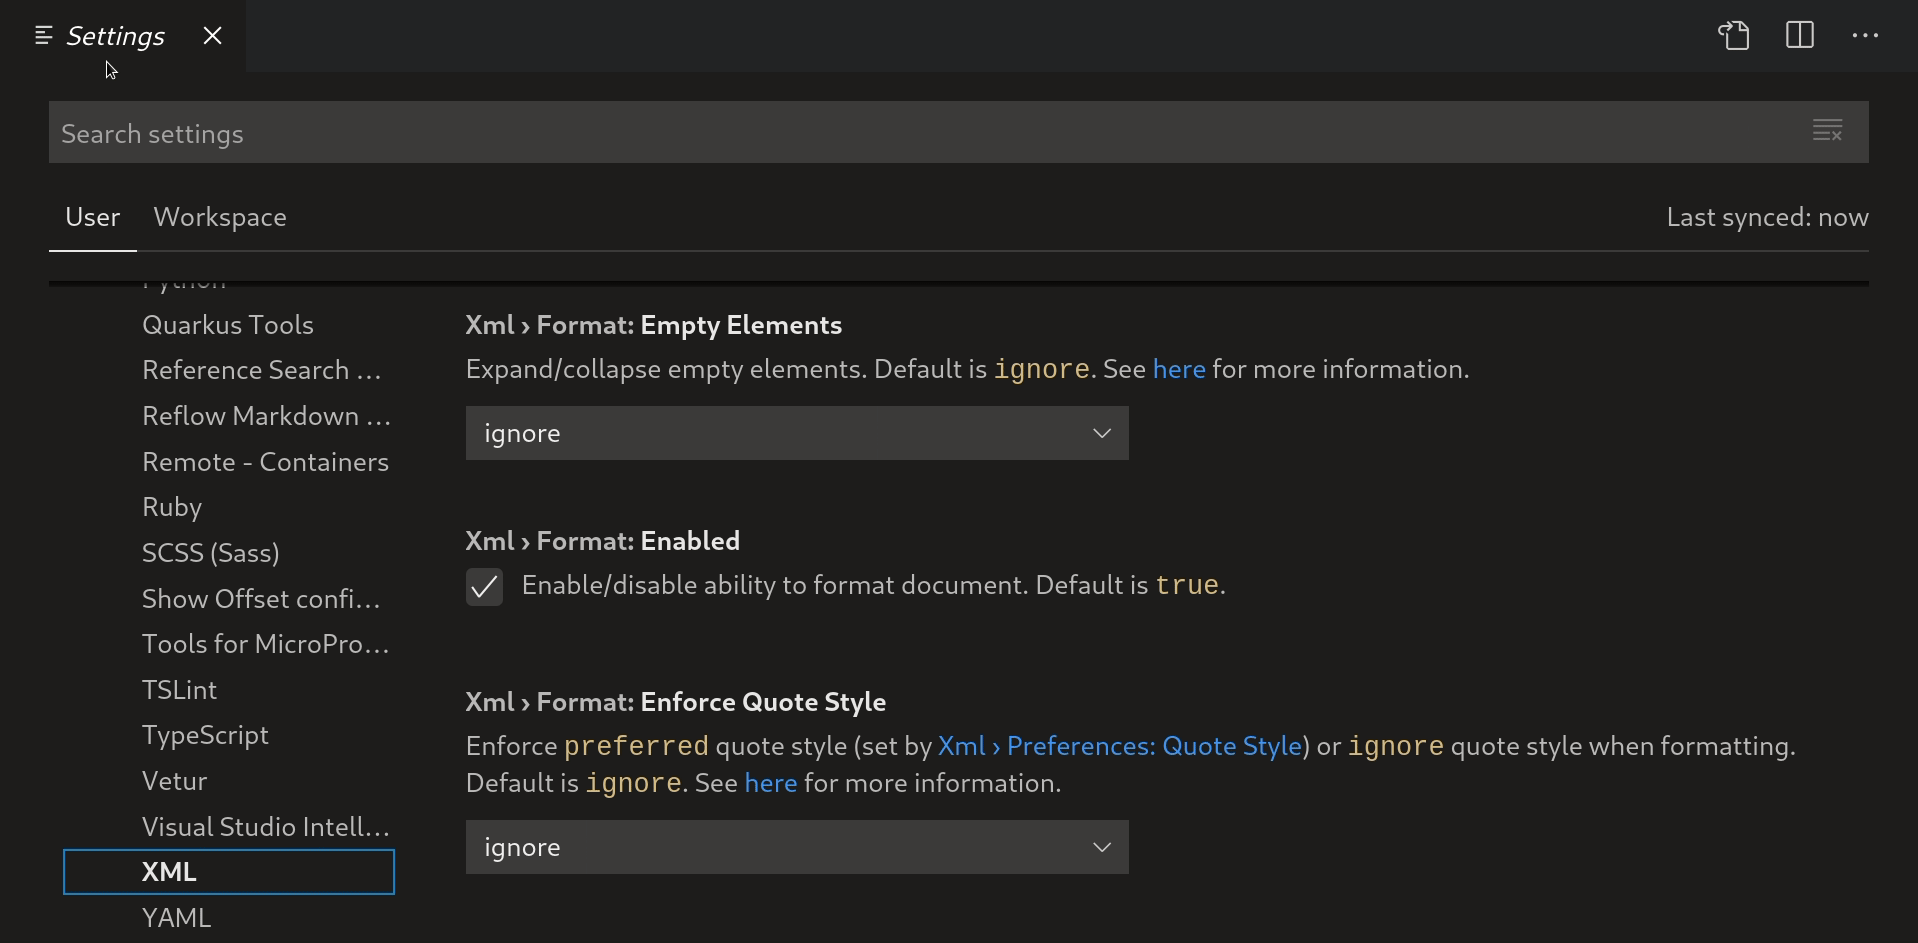 There is a link in the description of the Empty Elements XML formatting option in the VS Code settings page. Clicking on it navigates to the related section in the XML Documentation, which provides a more detailed description of the option, along with examples.